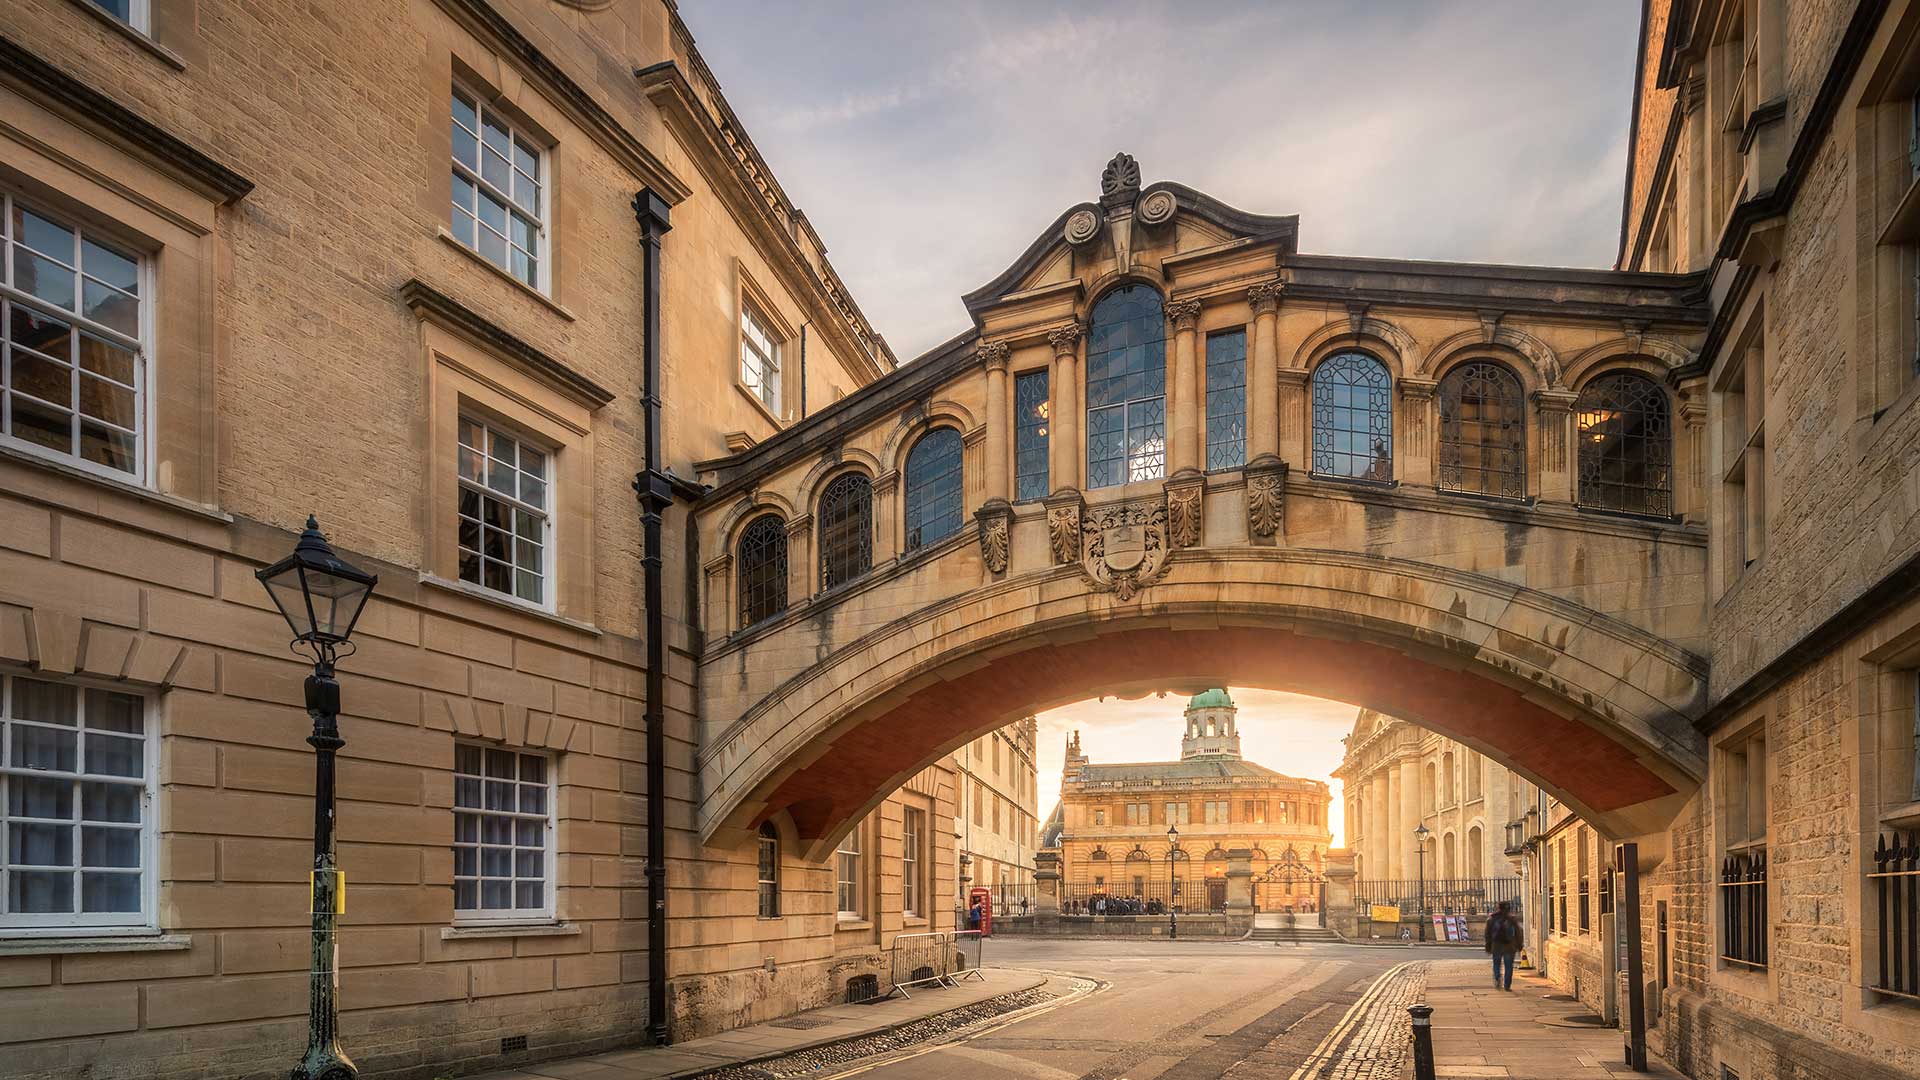 The Bridge of Sighs in Oxford